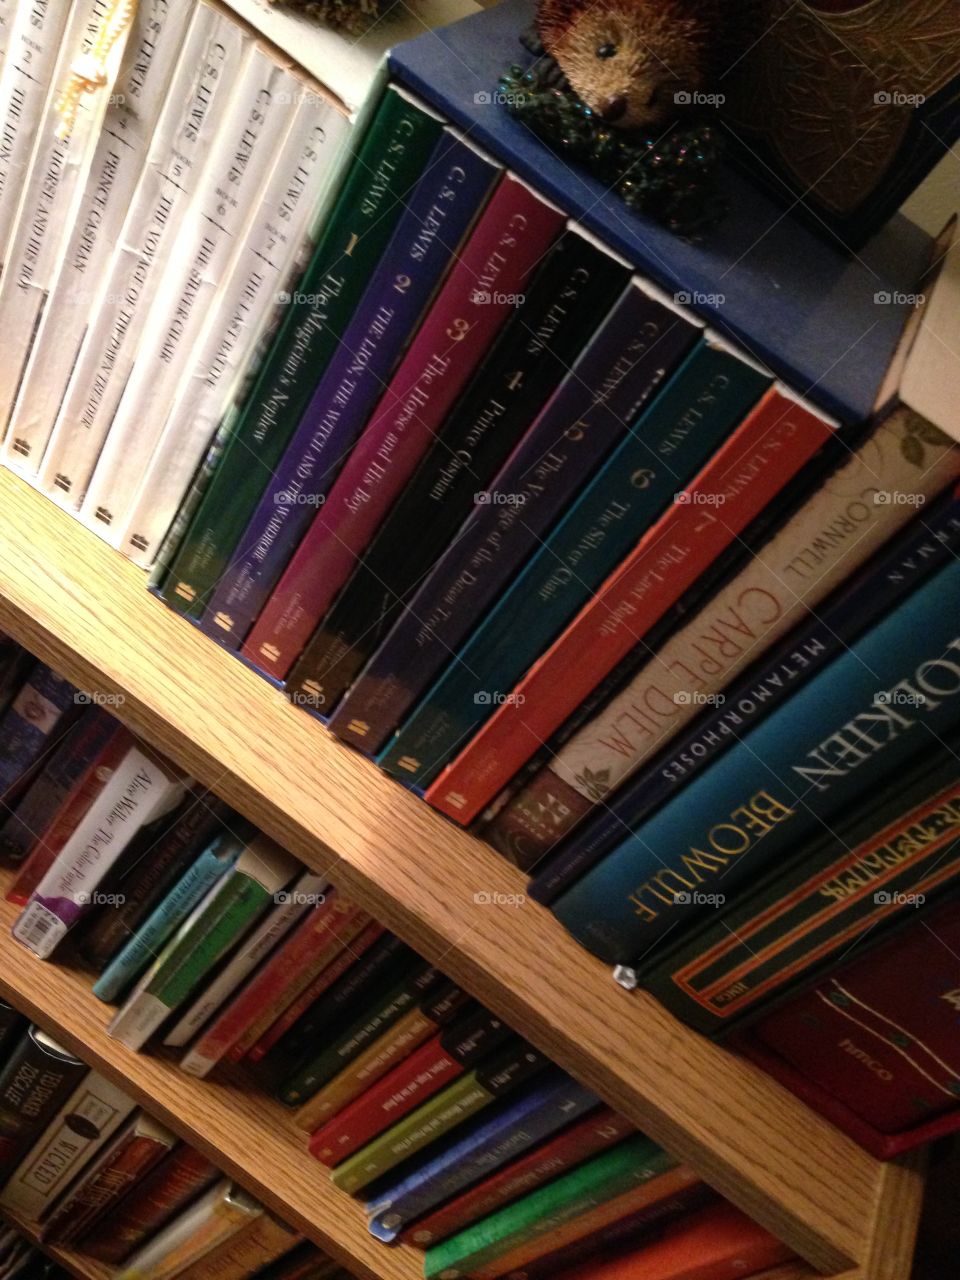 Bookcase full of books (focusing on the Chronicles of Narnia, as it happens)